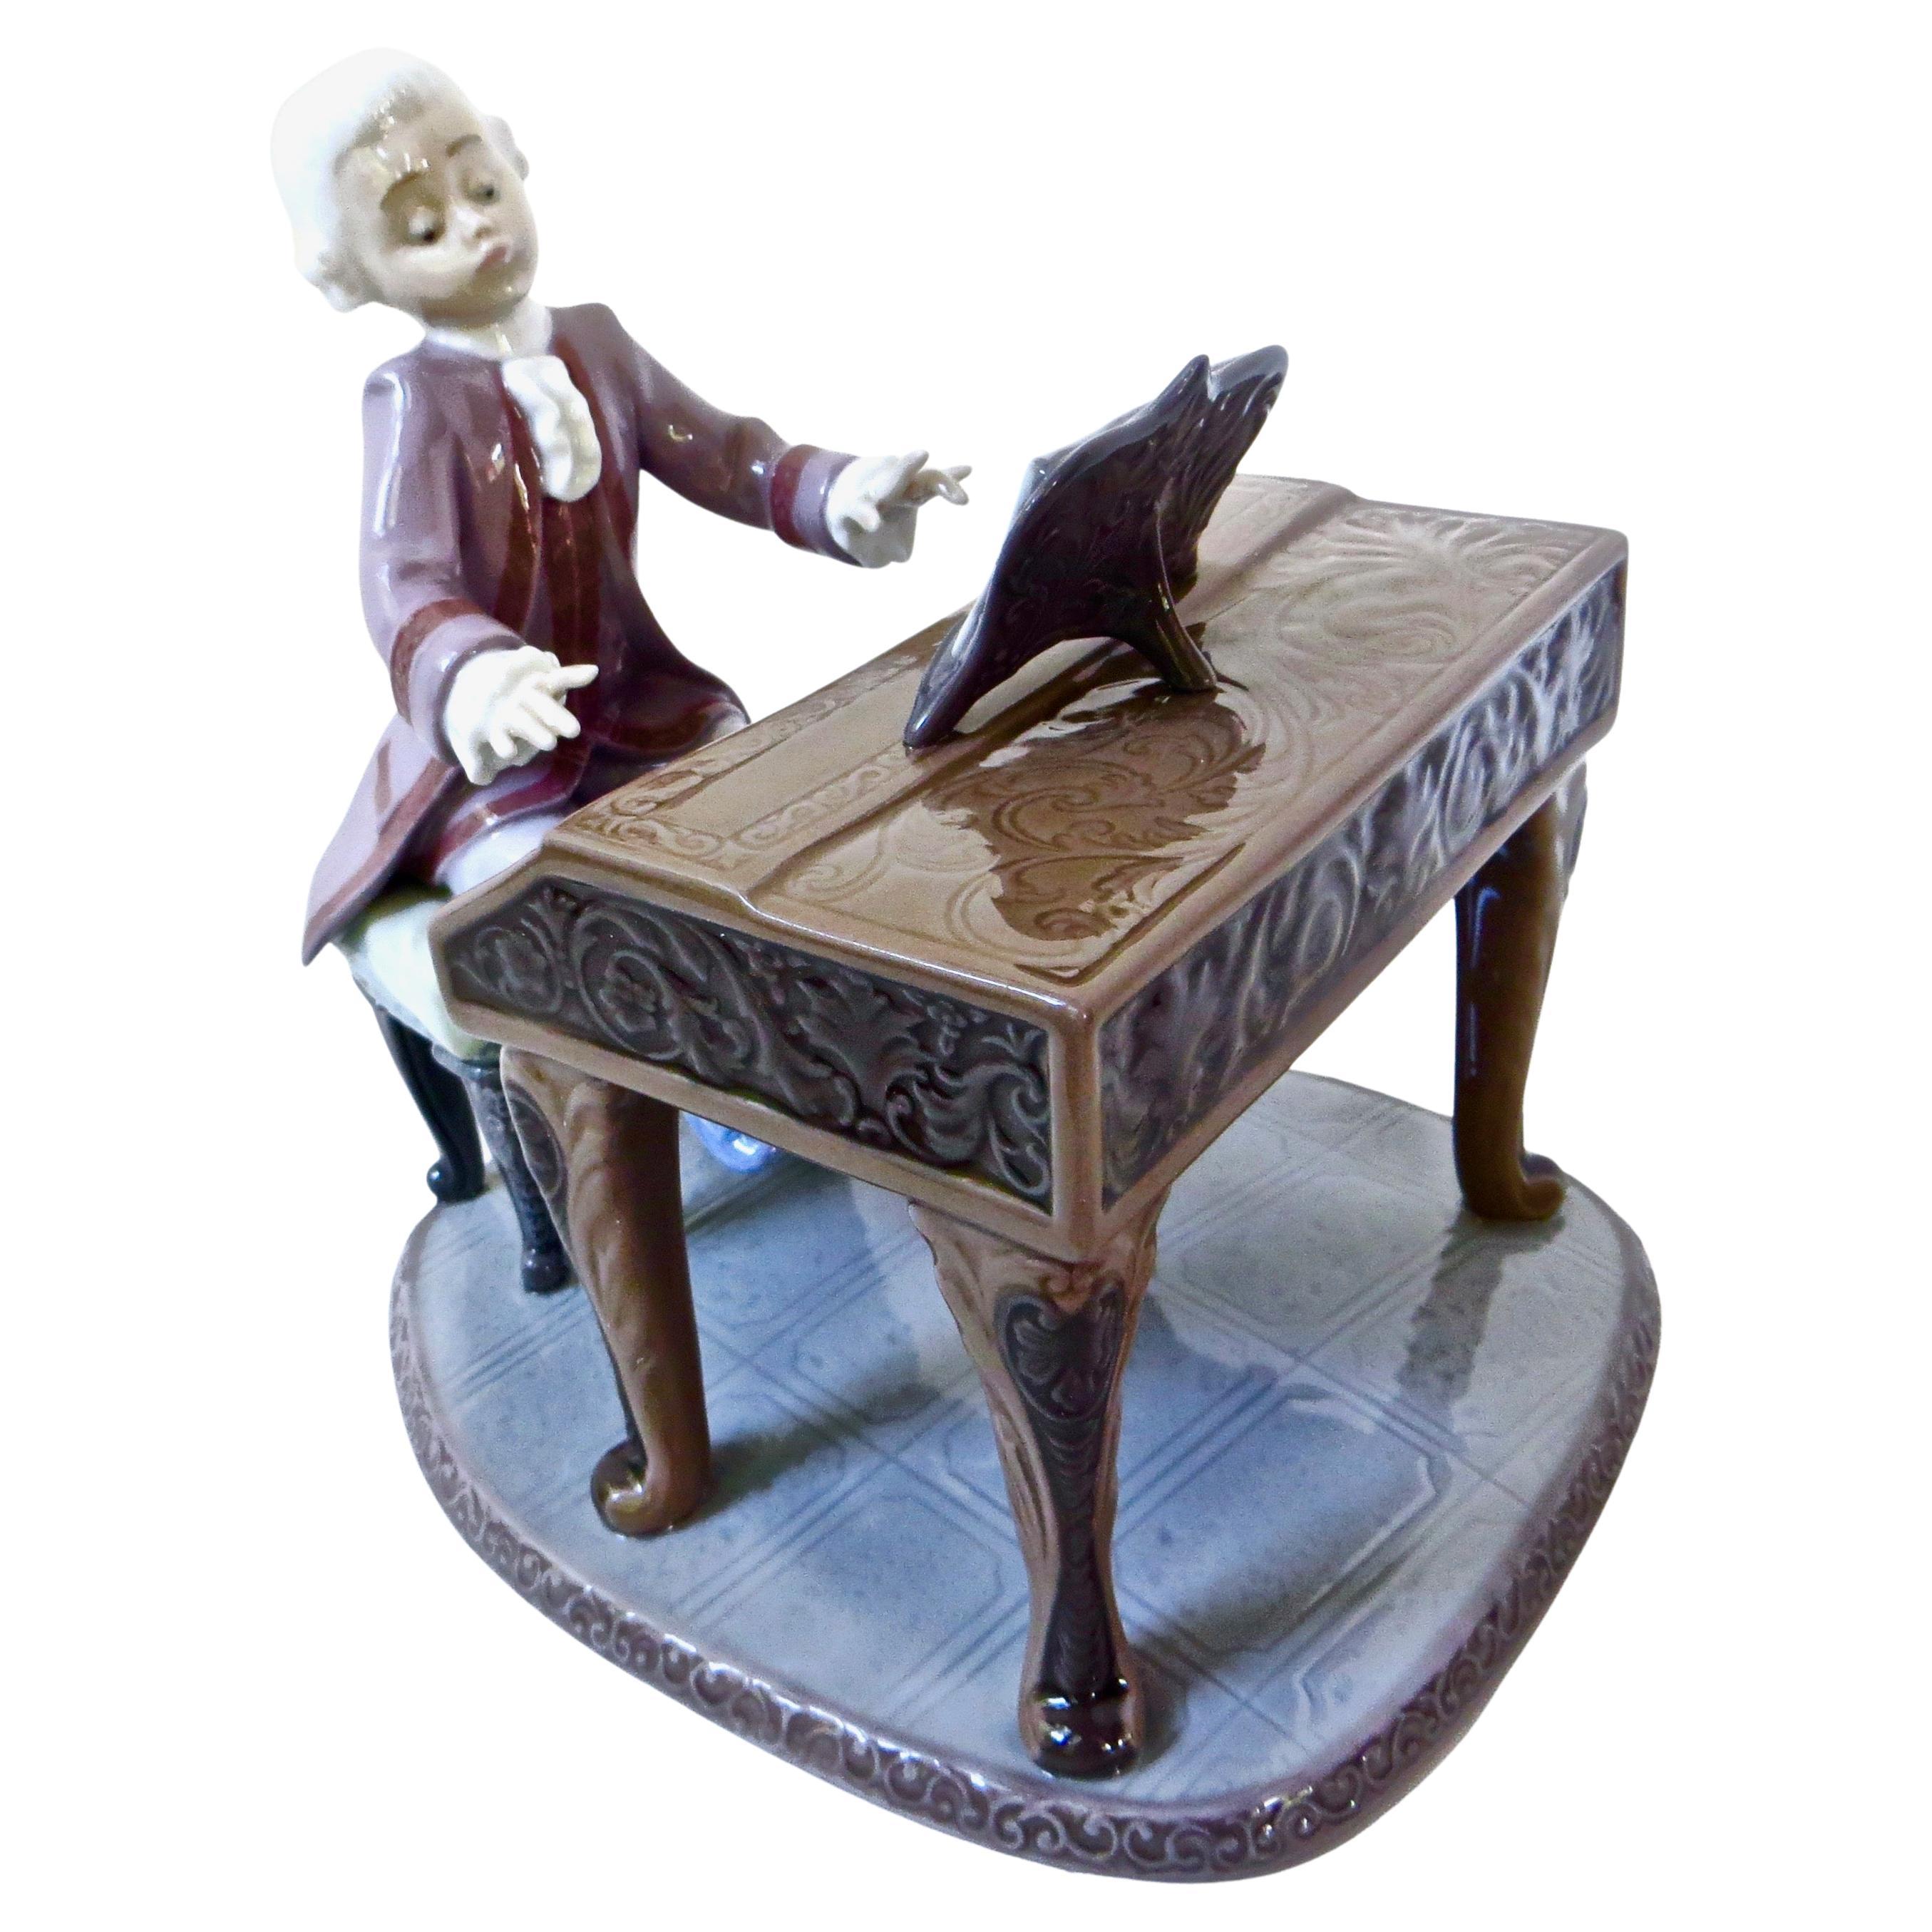 "Young Mozart" Porcelain Sculpture by Lladro, Spain. Depicts Mozart at The Piano For Sale